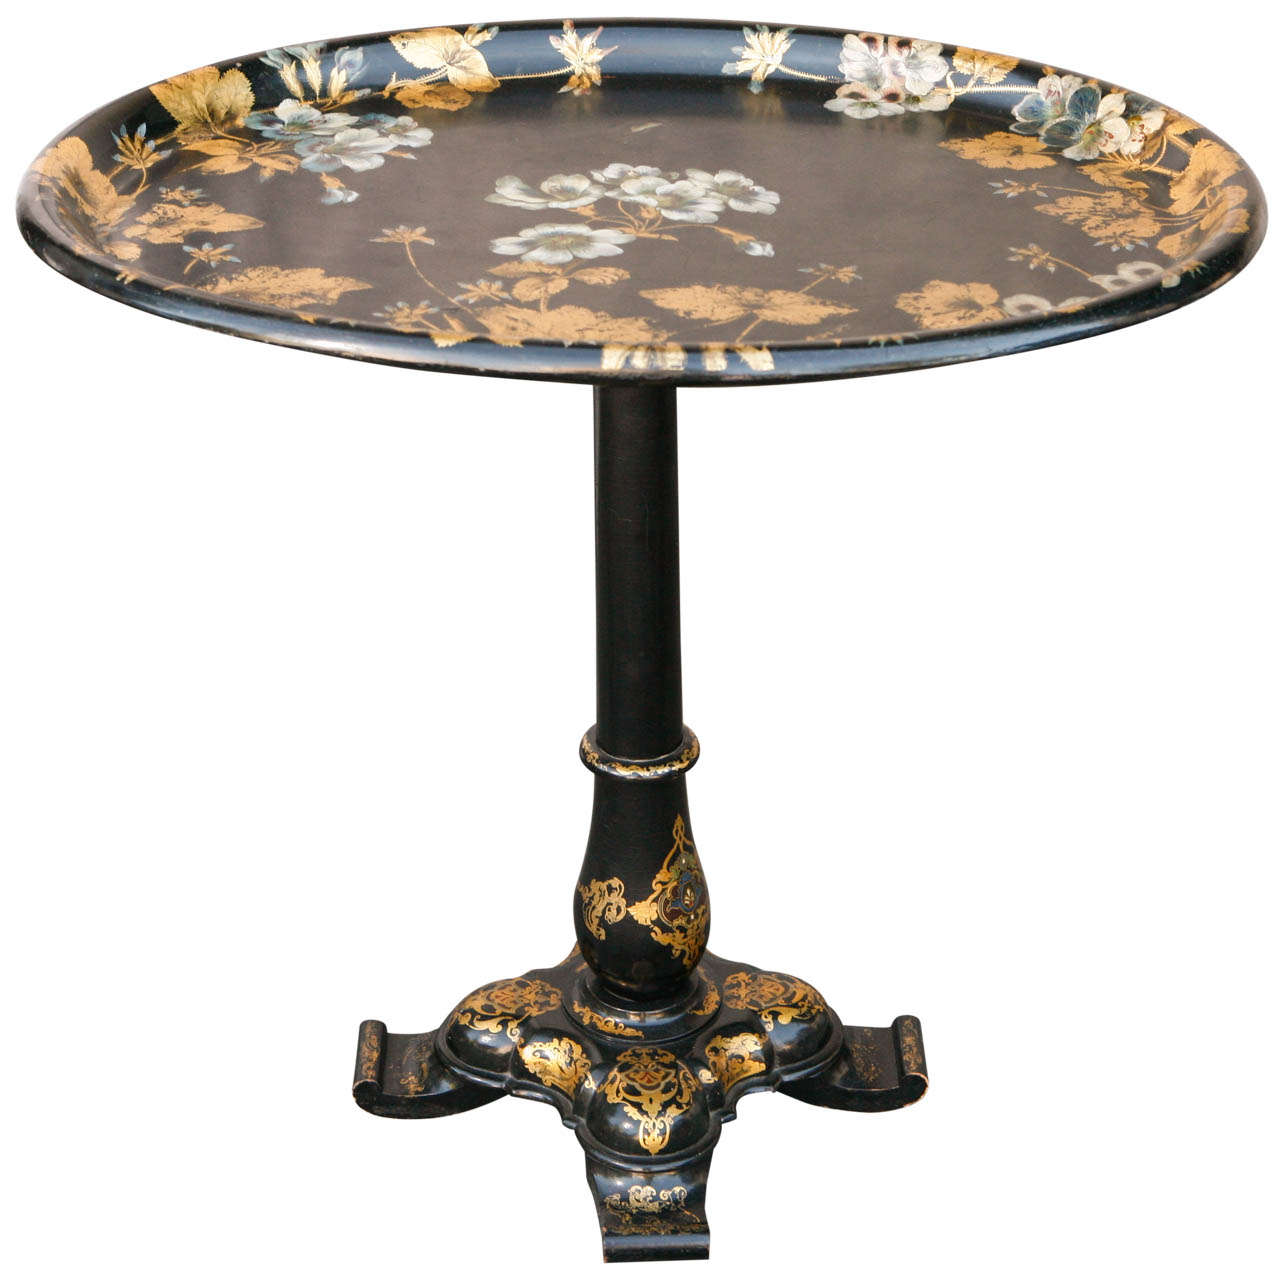 19th Century French Papier-Mâché Flip-Top Tray Table For Sale